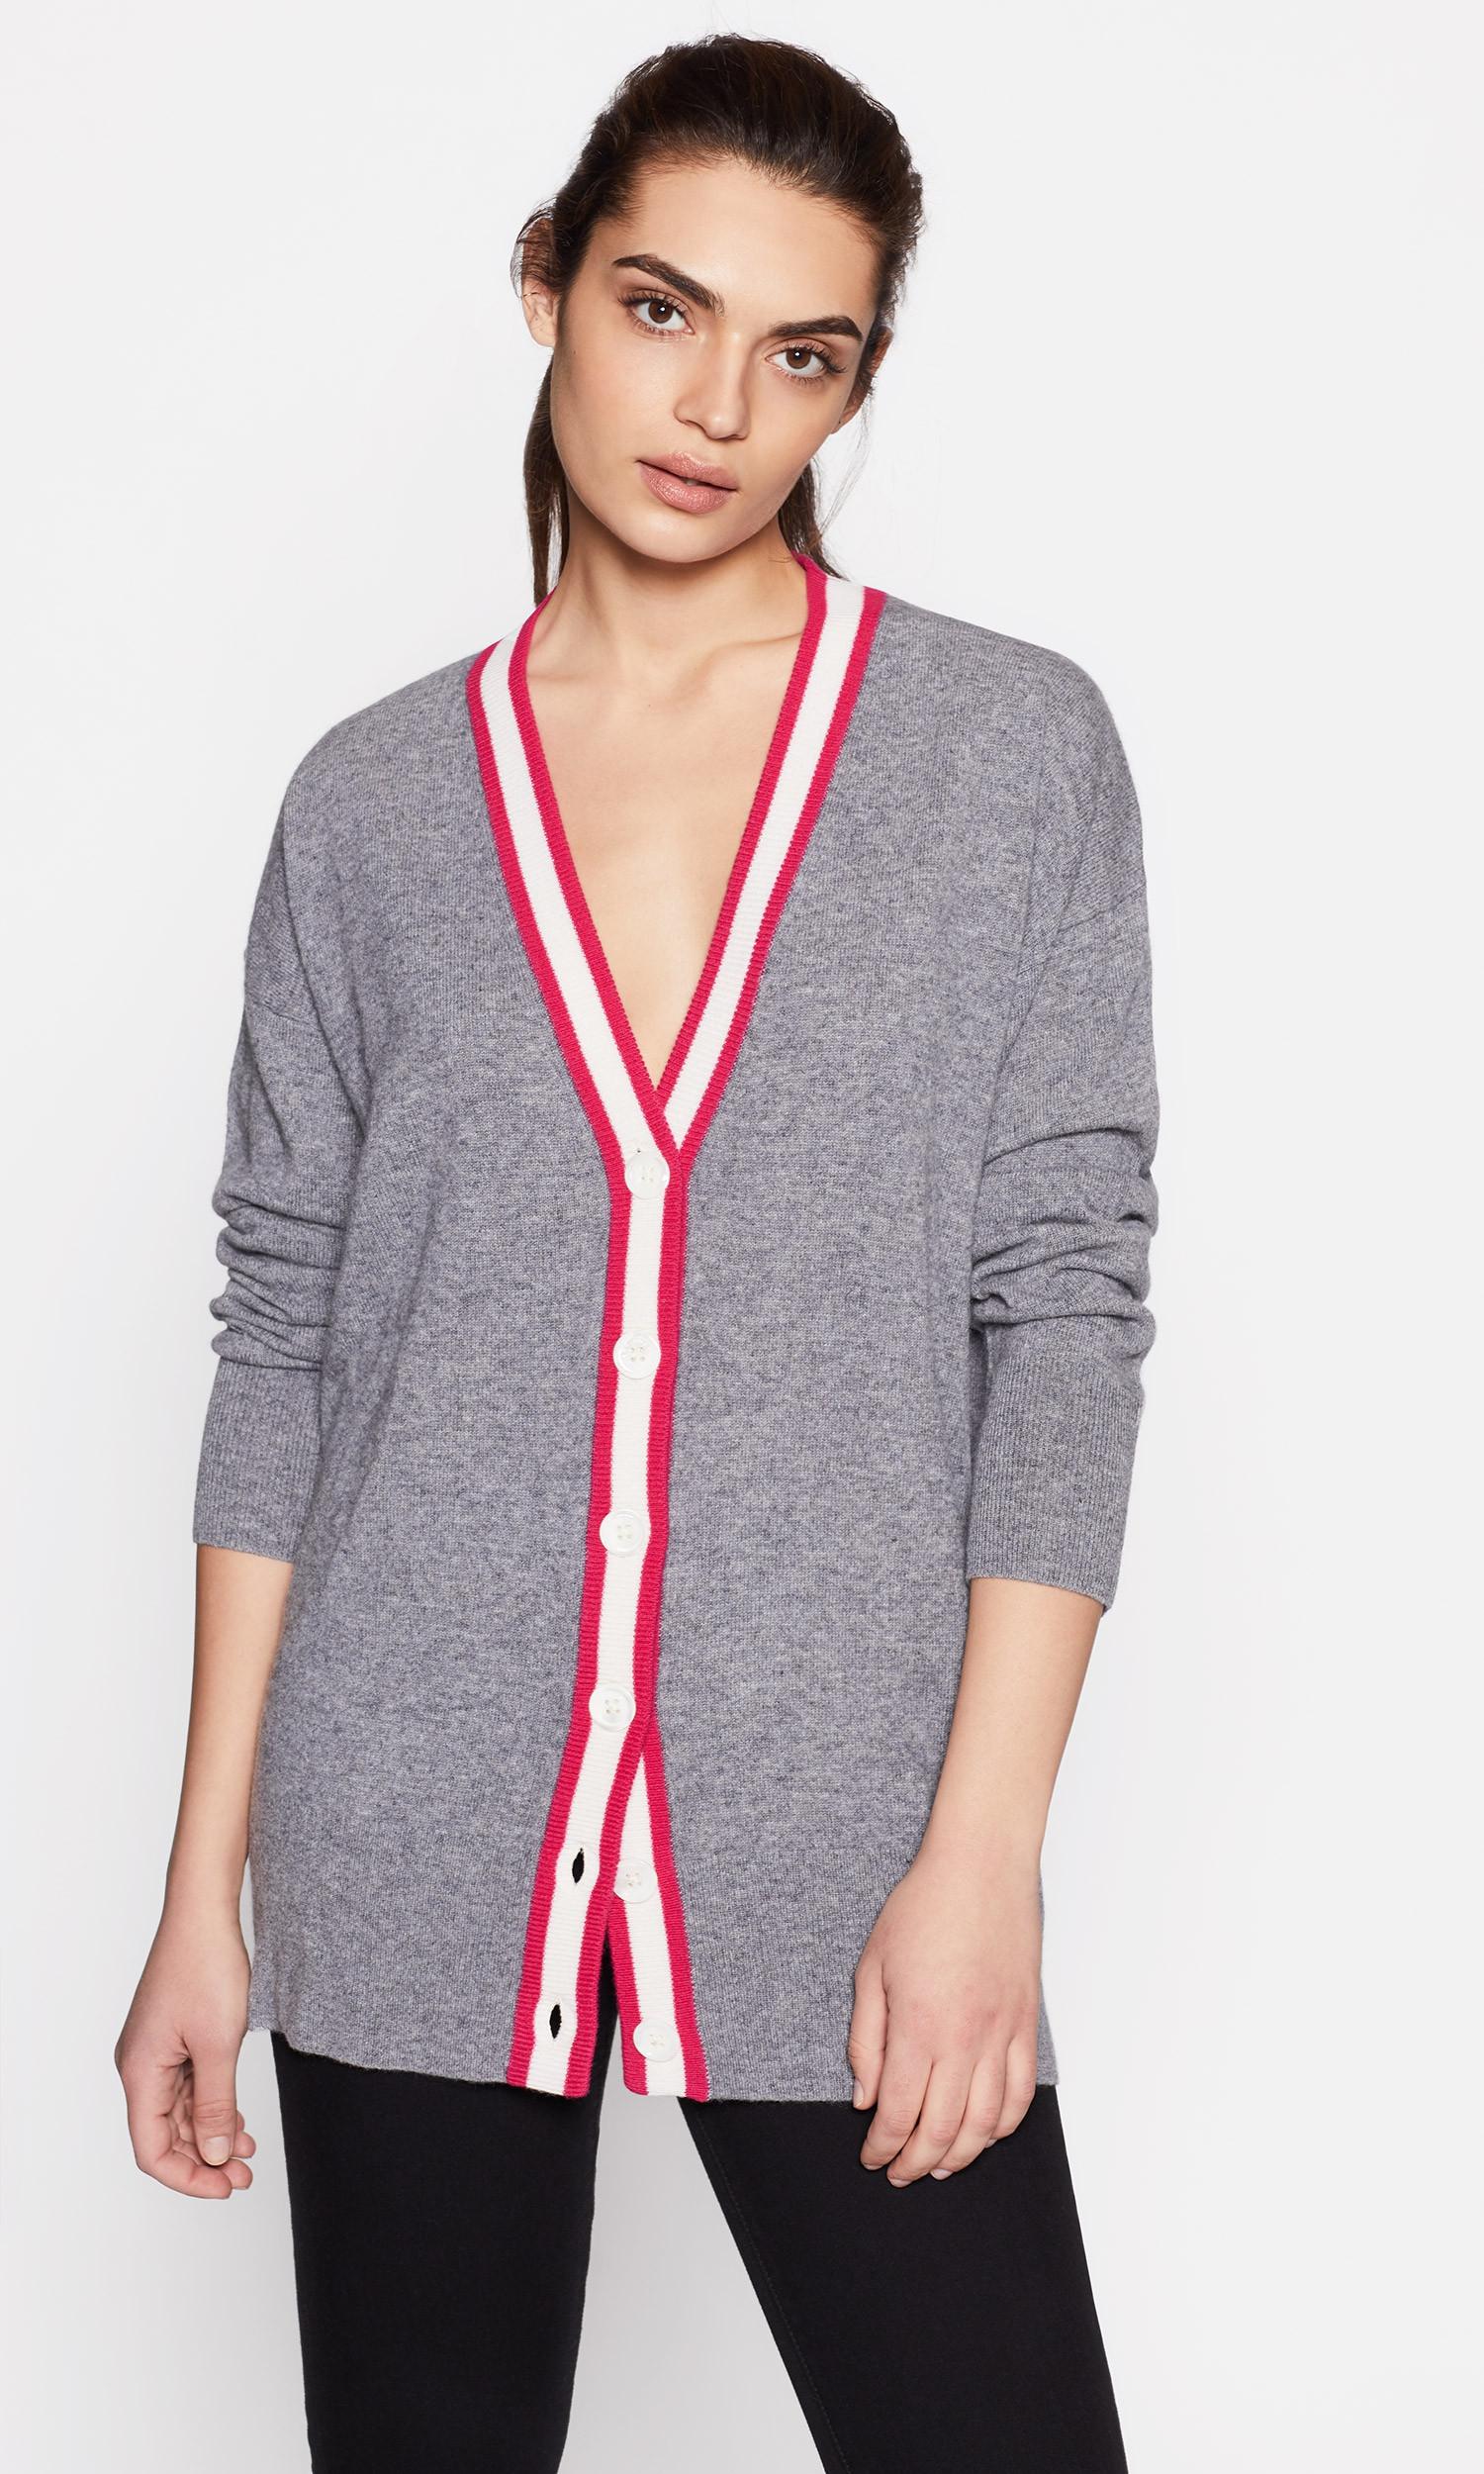 Equipment Gia Cardigan With Piping in Gray - Lyst